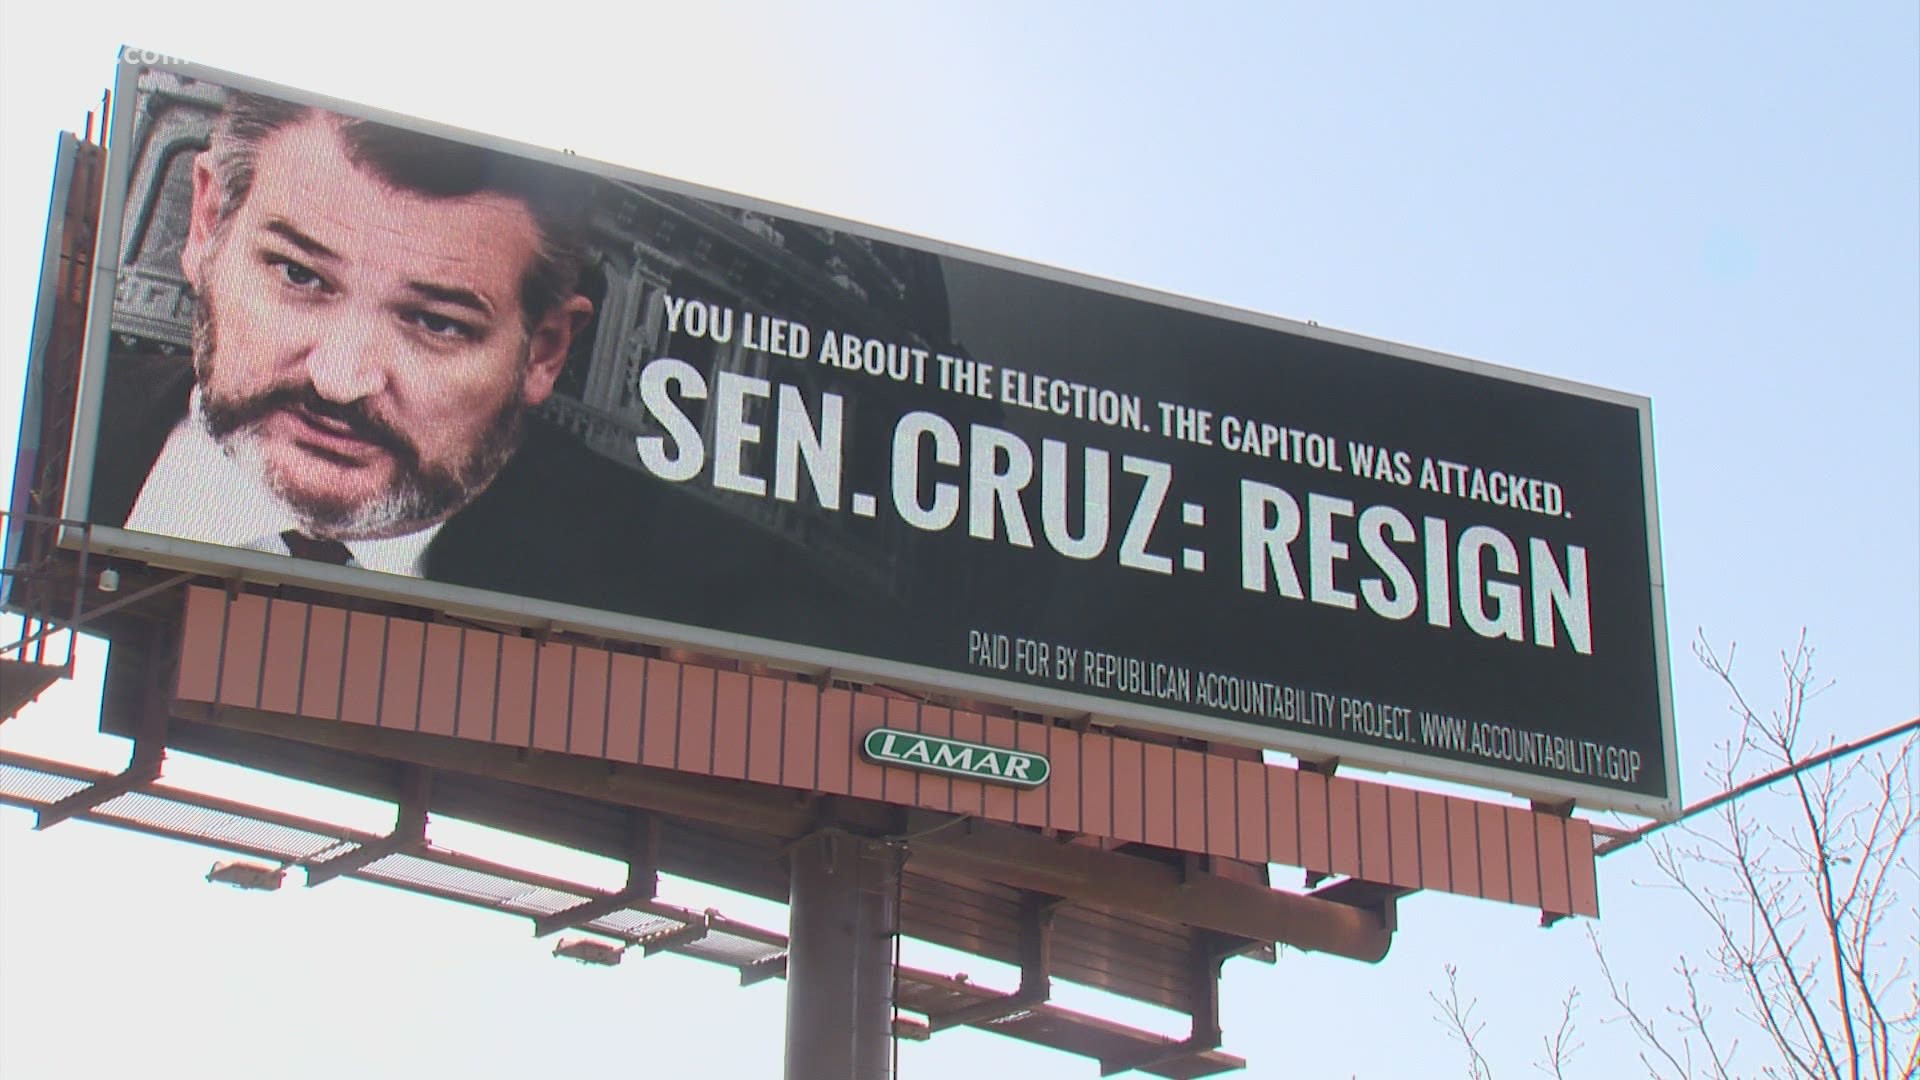 The billboards were sponsored by the Republican Accountability Project.